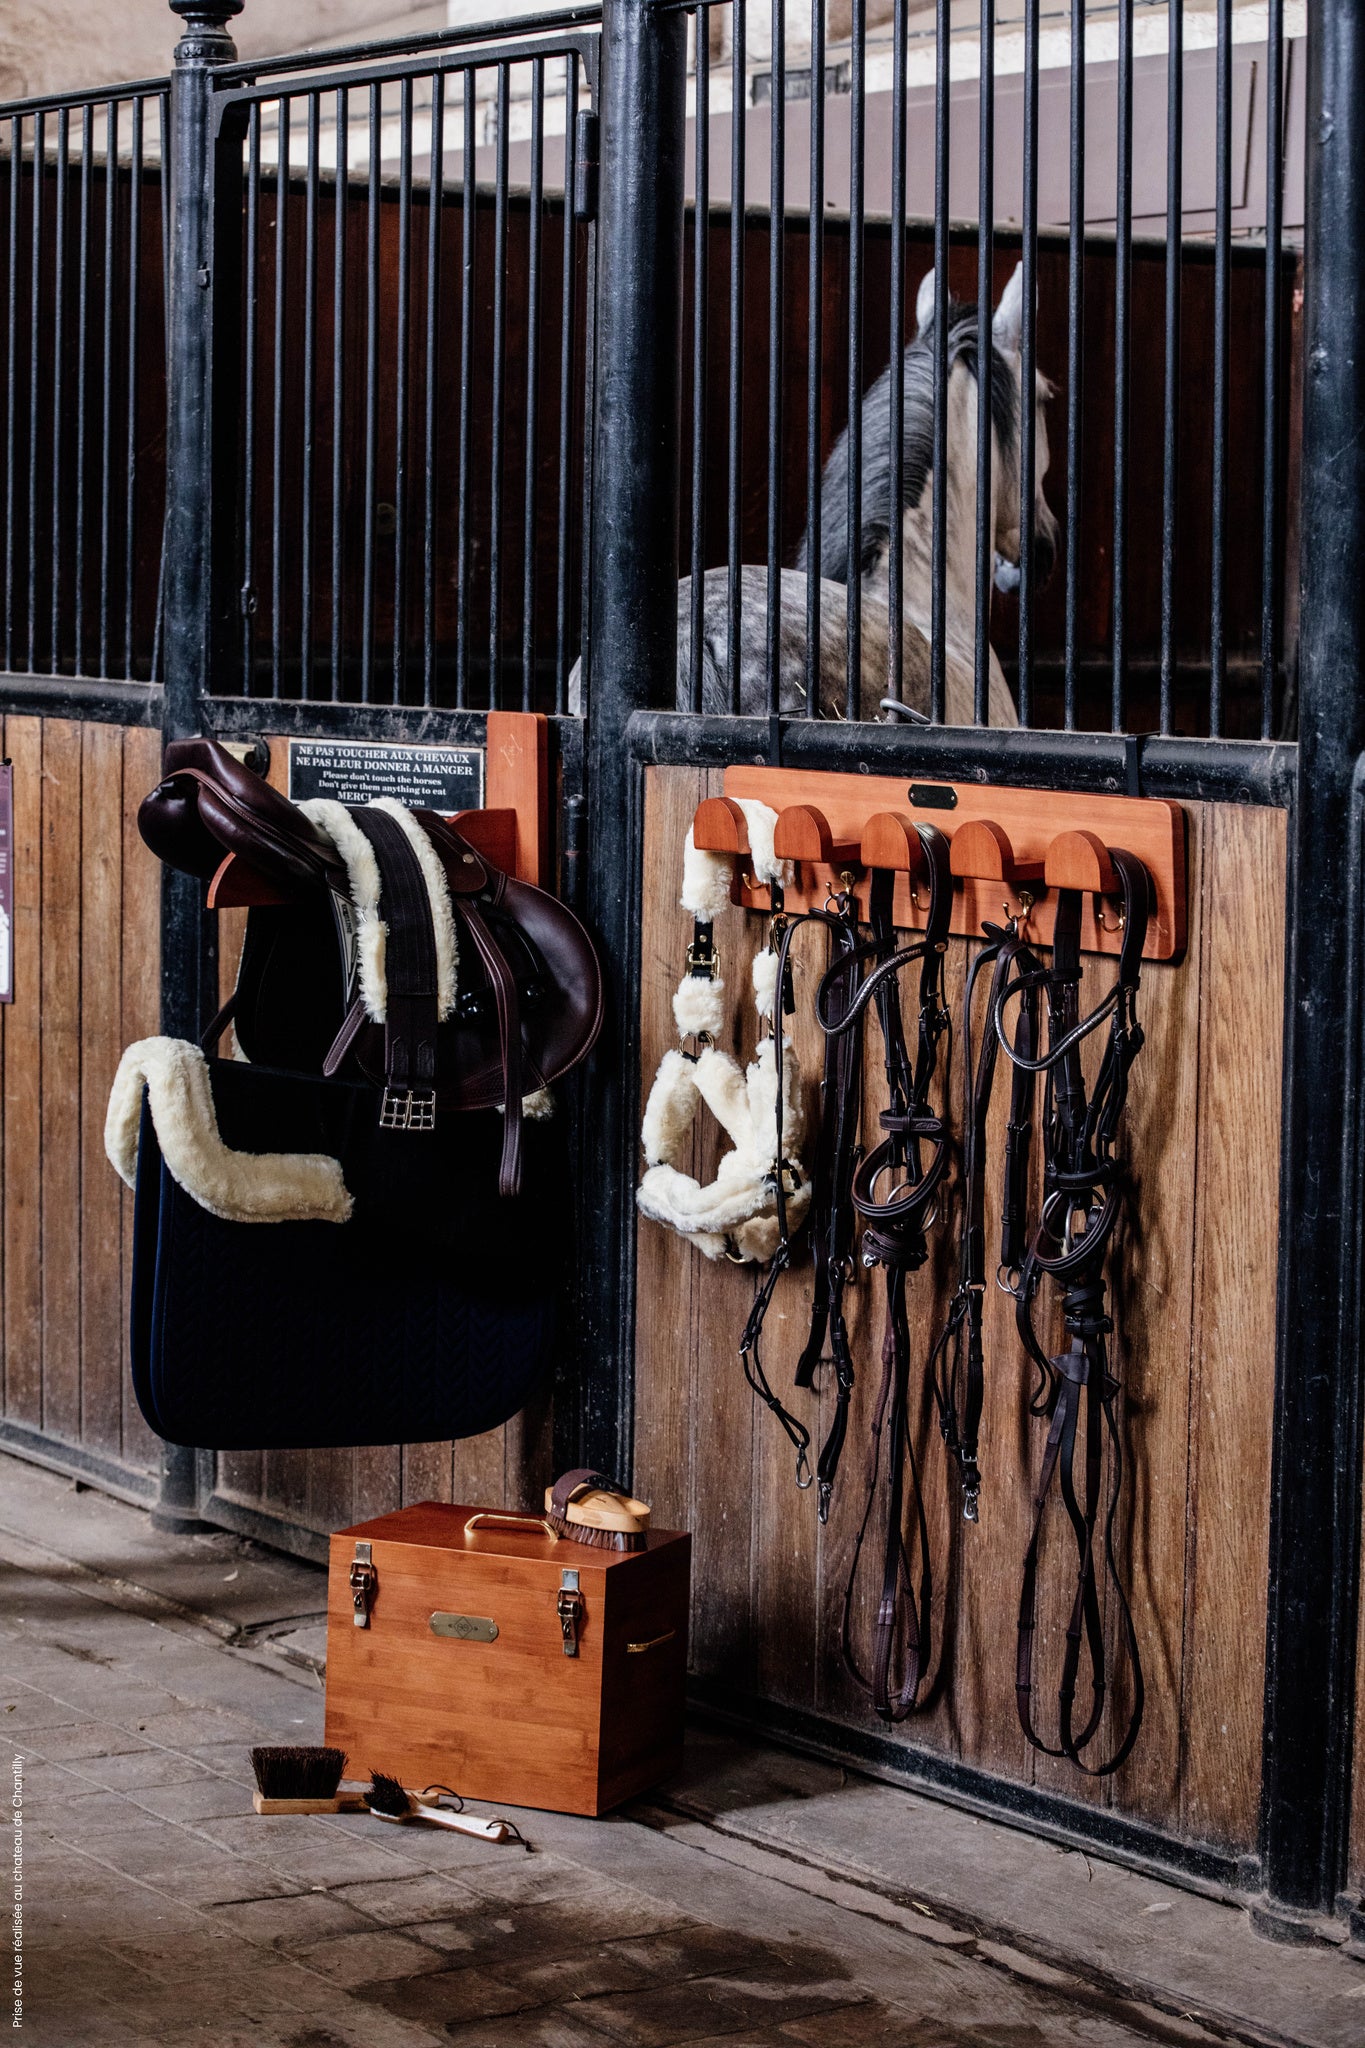 The Kentucky Bridle Rack will soon become a must have in your tack room! It is made out of bamboo which makes it extra resistant and easy to clean. It gives you space to hang 5 bridles or halters. The 5 extra golden hooks give this rack a classy look, as long as the possibility to hand breastplates or leads.